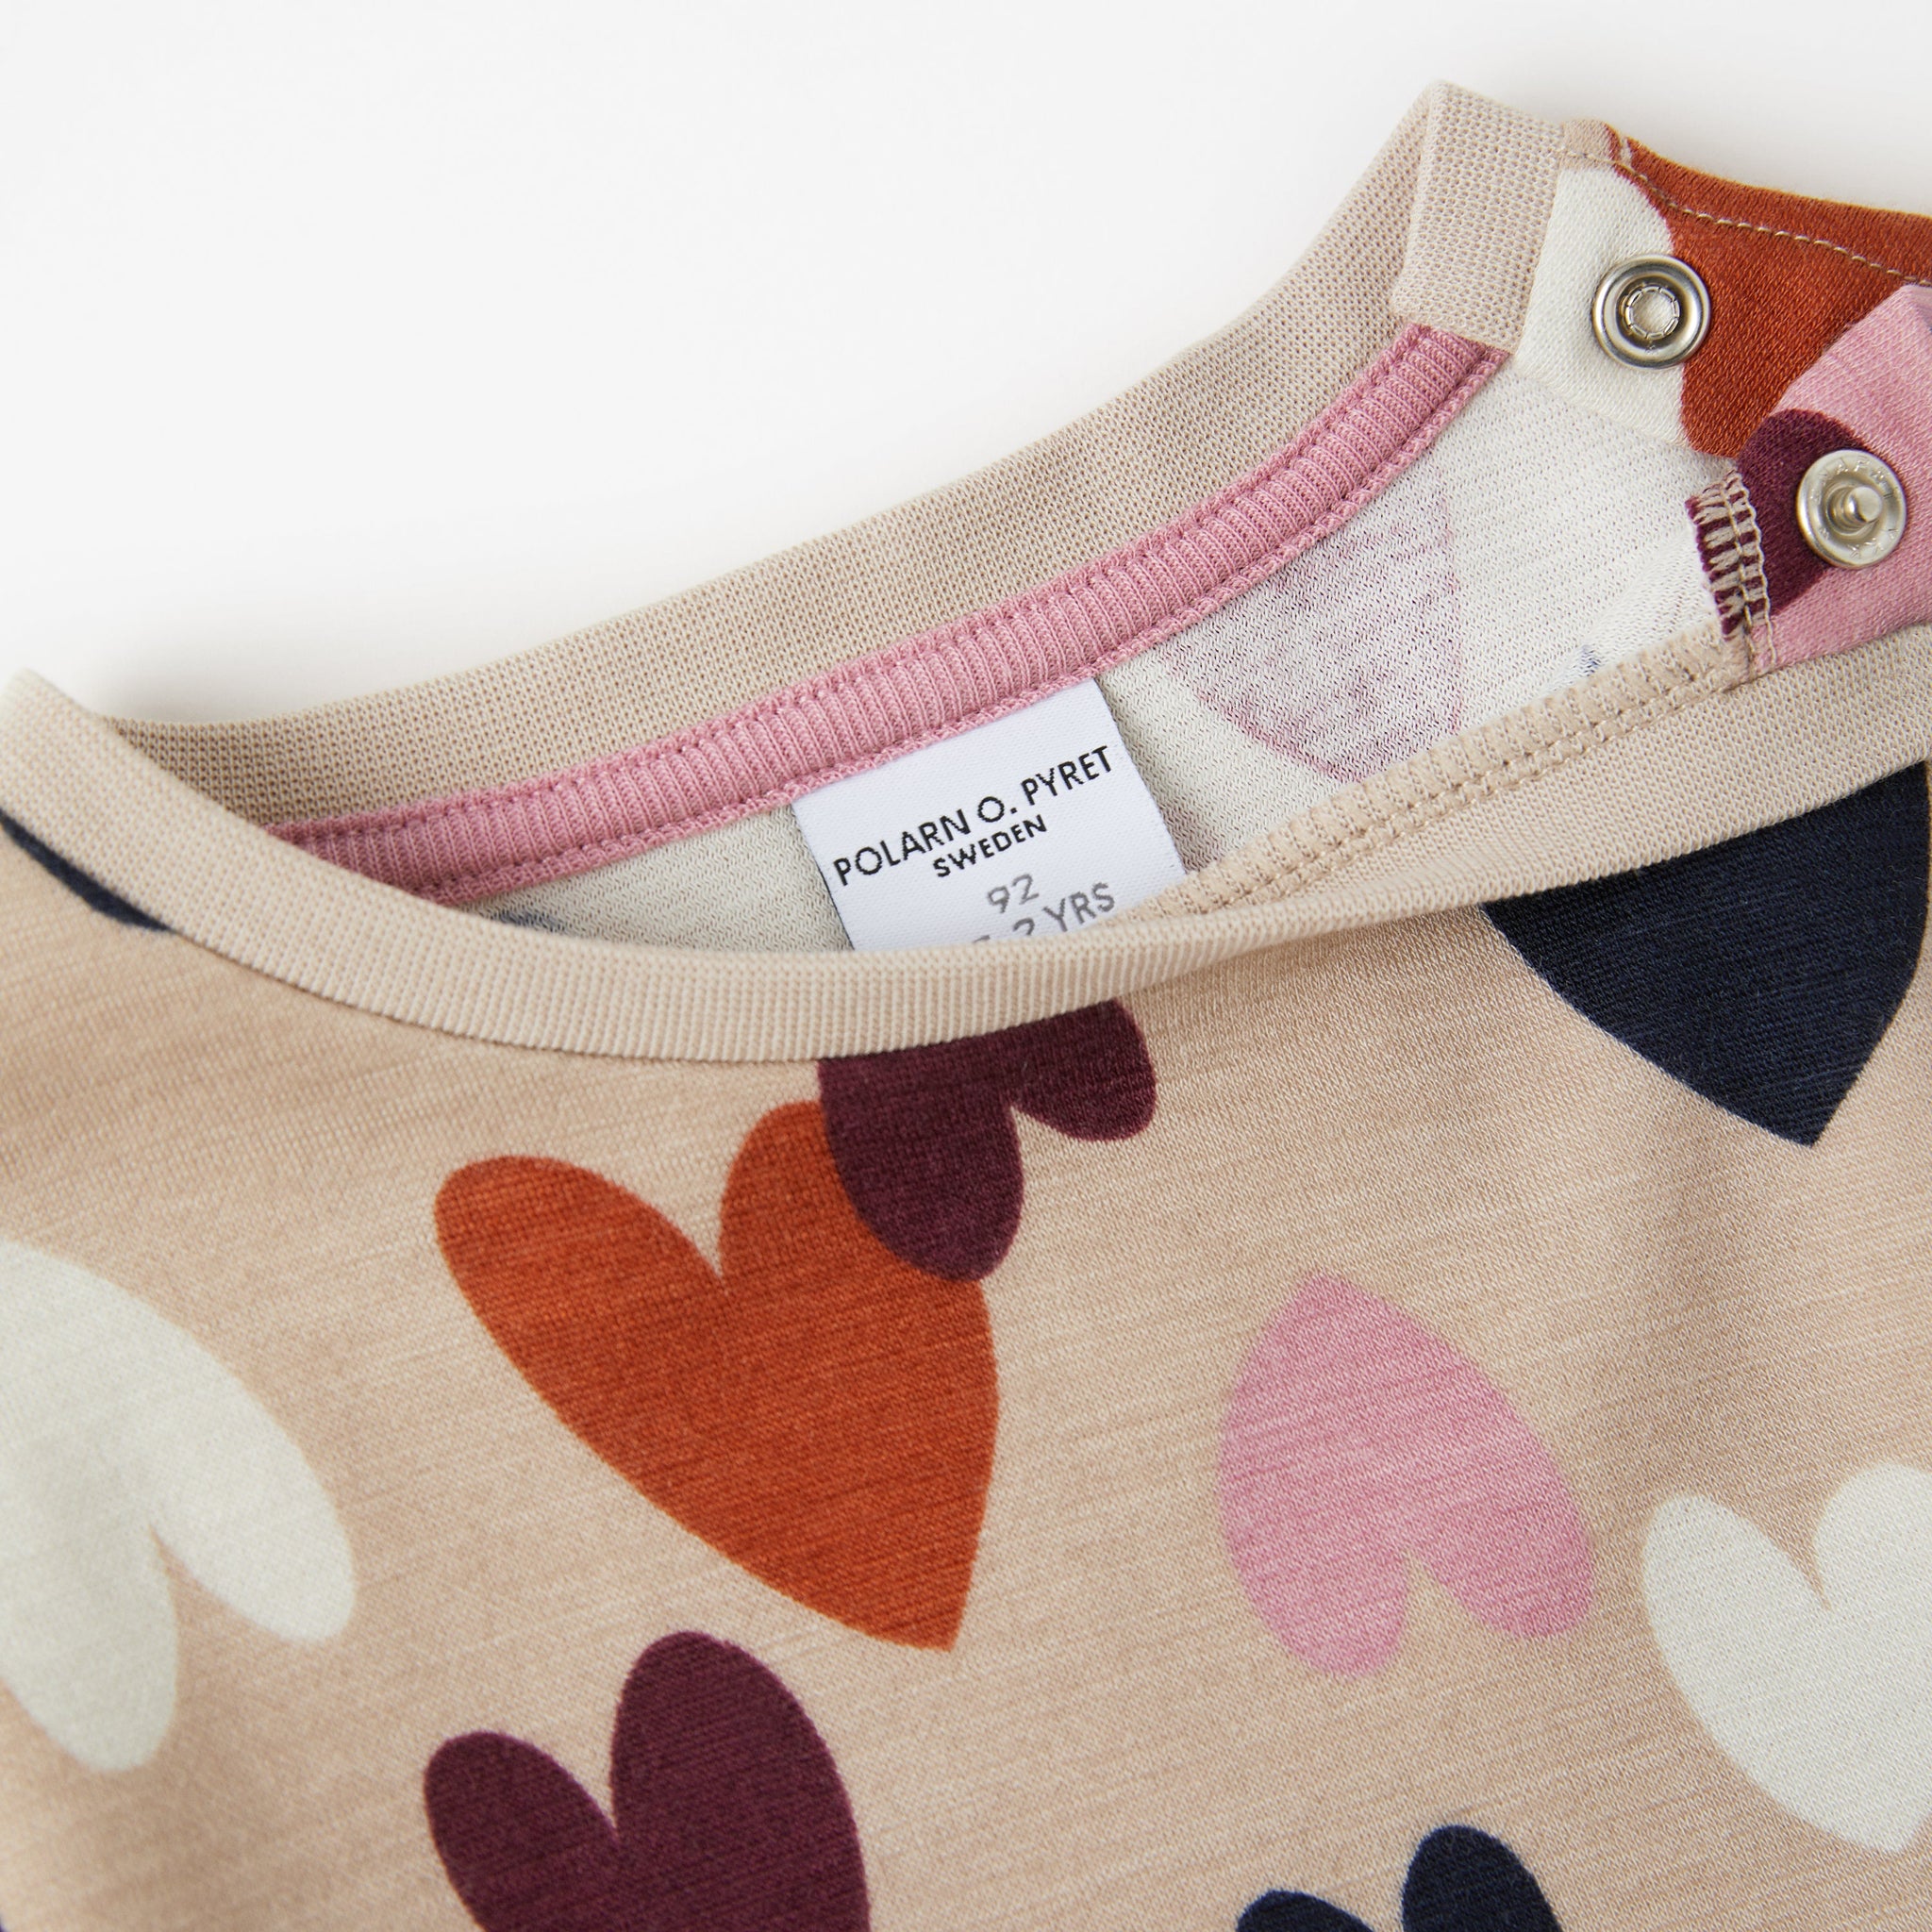 Heart Print Girls Dress from the Polarn O. Pyret kidswear collection. Clothes made using sustainably sourced materials.